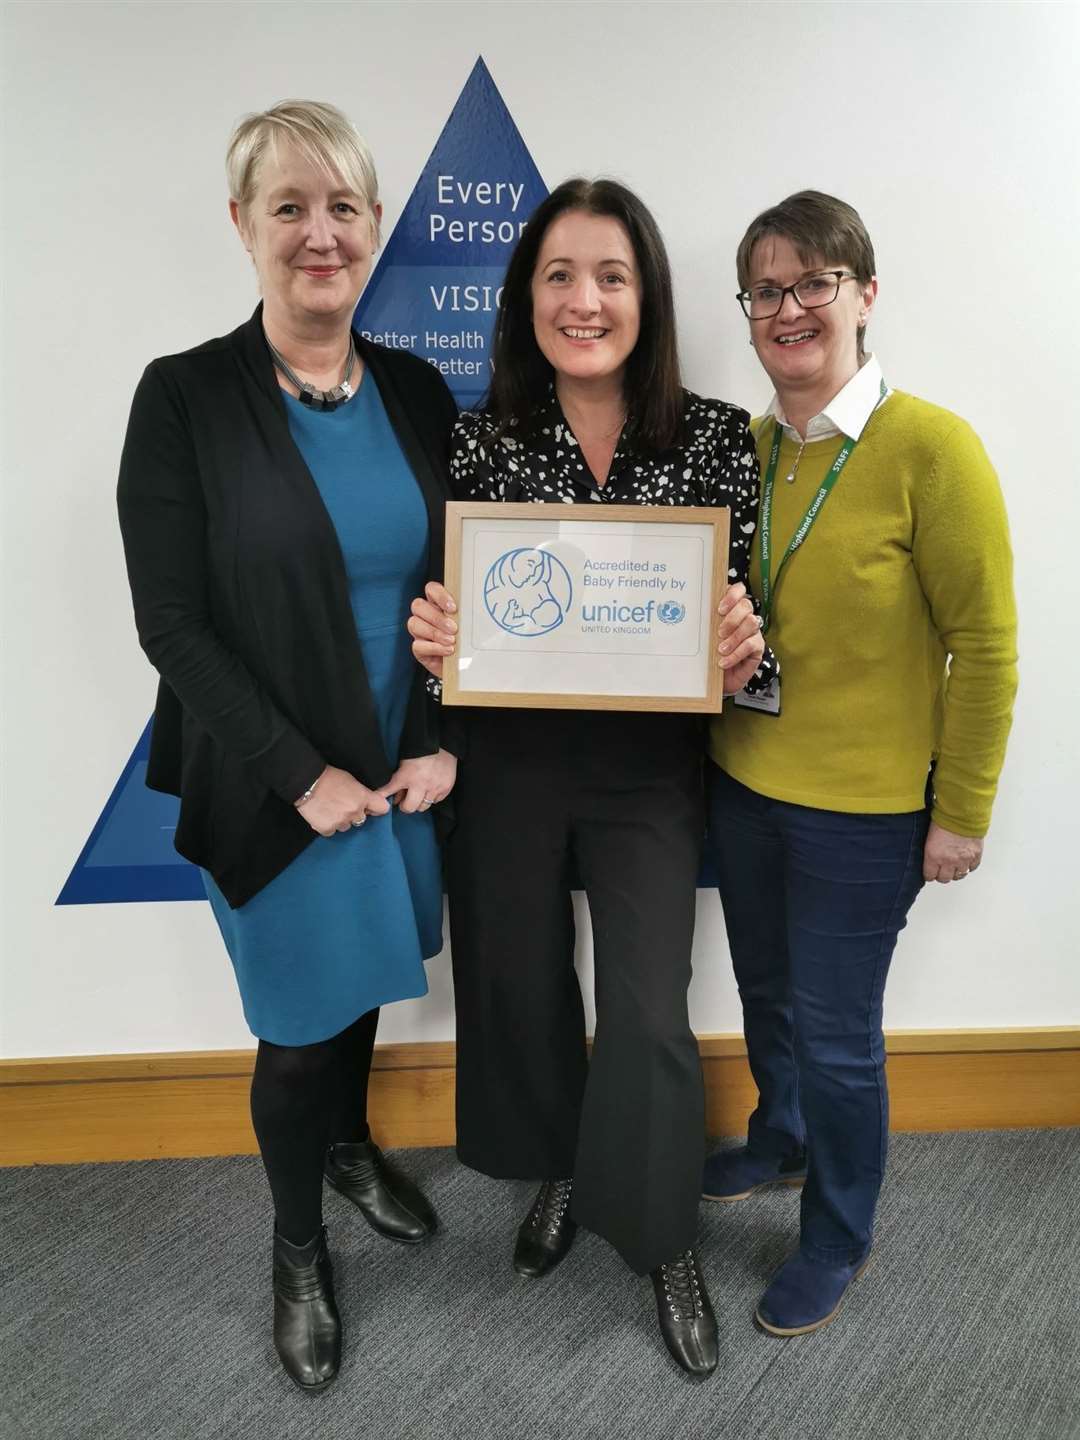 Mary Burnside, NHS Highland’s head of midwifery, Beverley Green, NHS Highland’s senior health improvement specialist and Susan Russell, Highland Council principal officer (nursing).